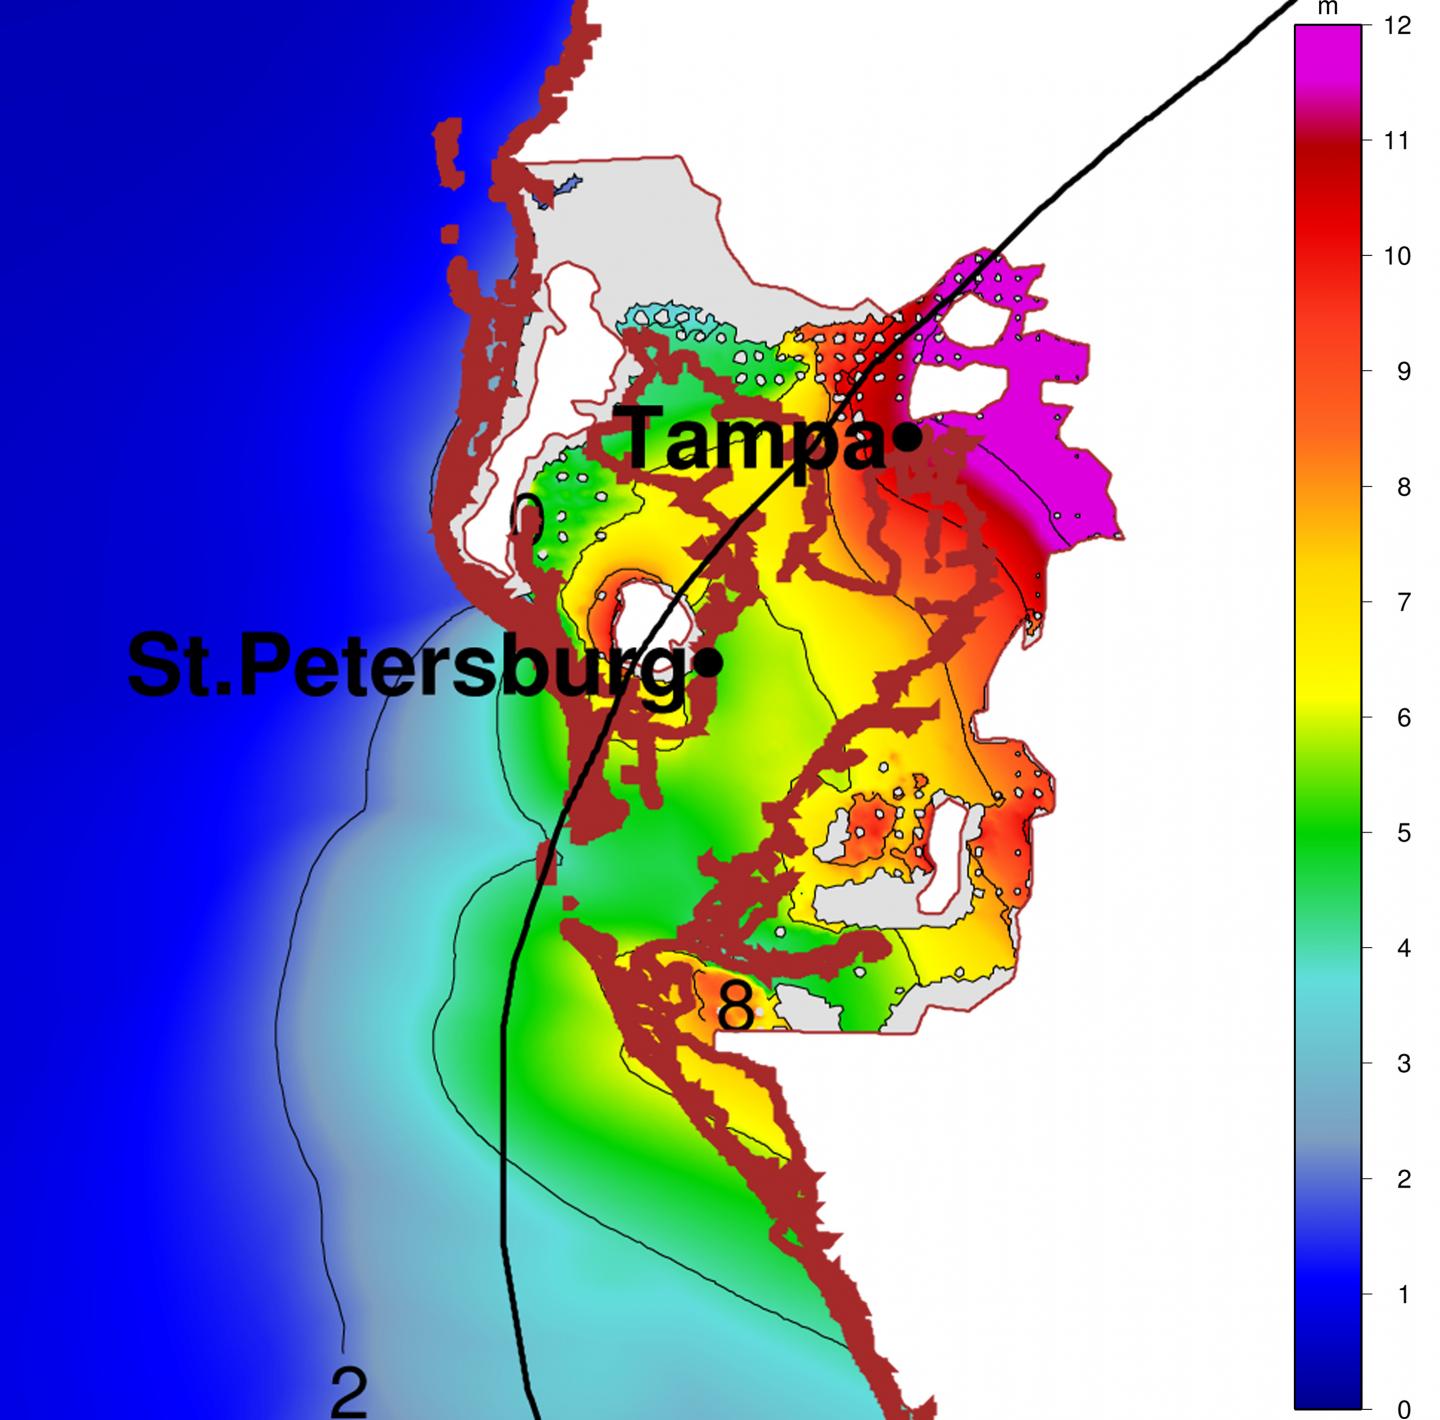 Possible End-Of-Century Storm Surge for Tampa, Florida